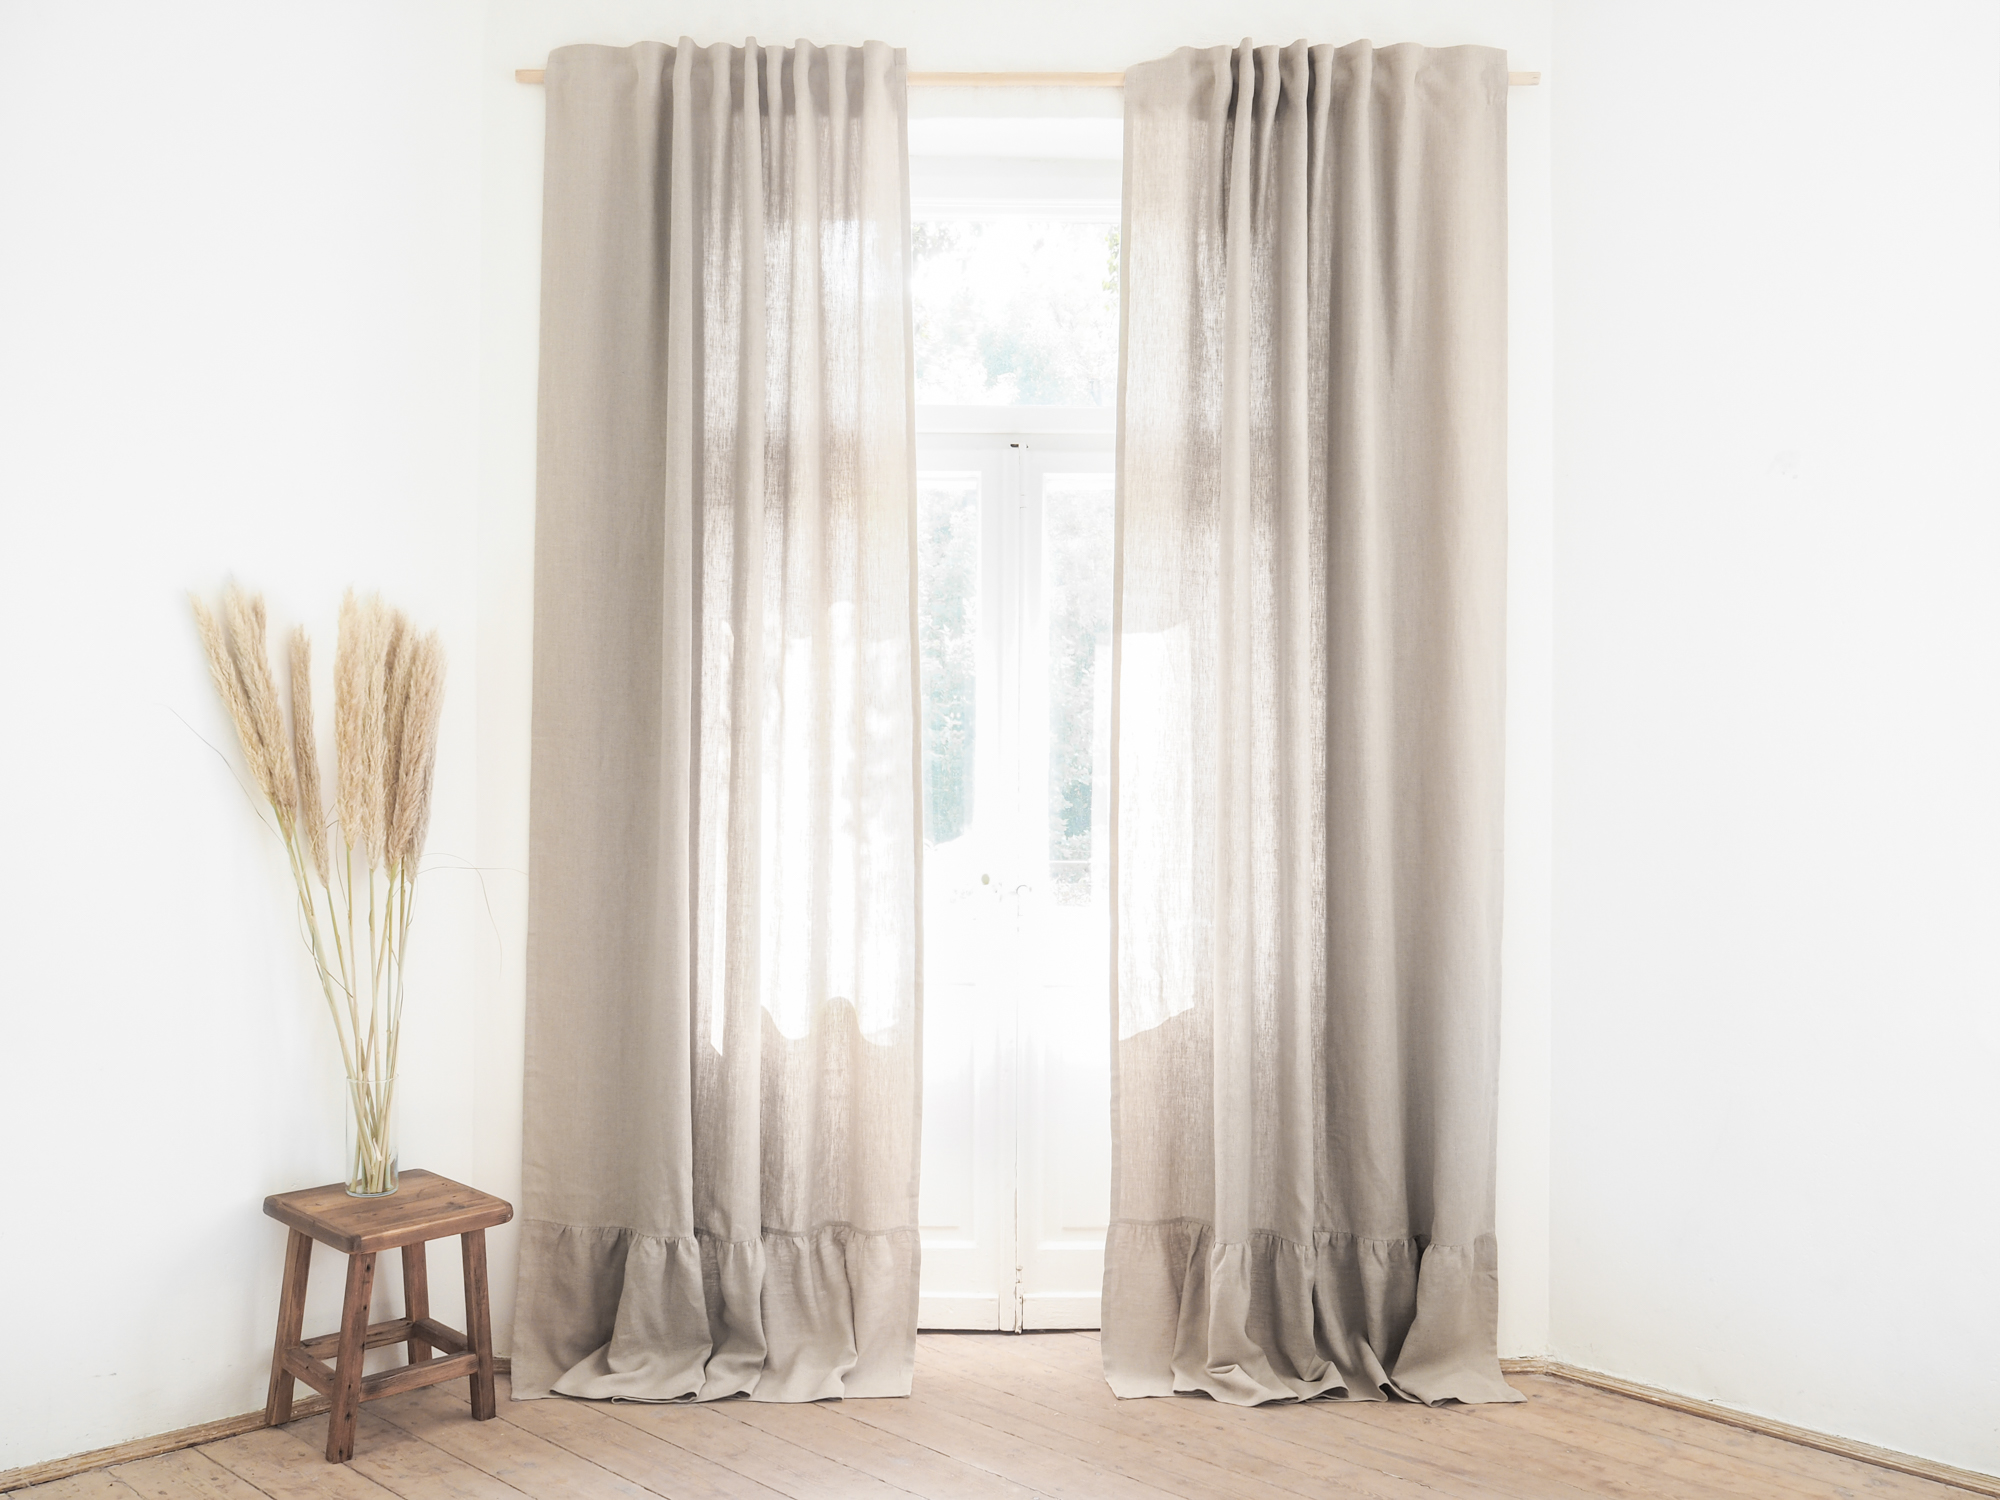 Solid linen curtains